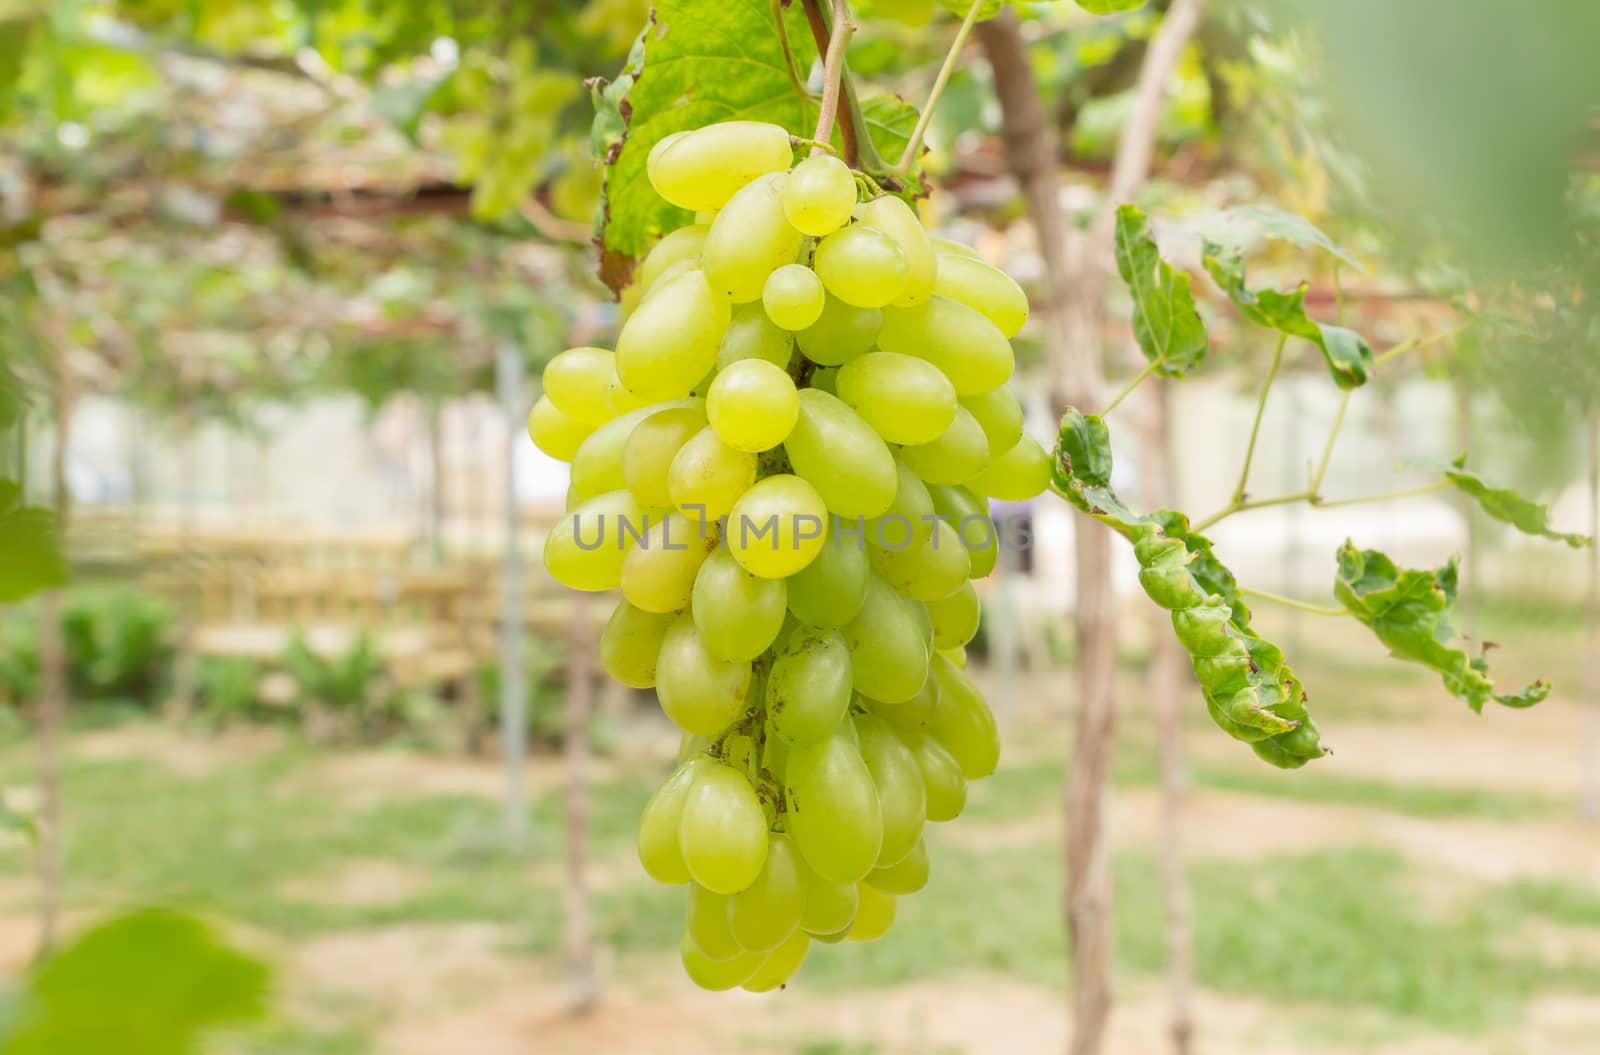 Green Grapes in Grape Garden or Vineyard Center of Frame by steafpong